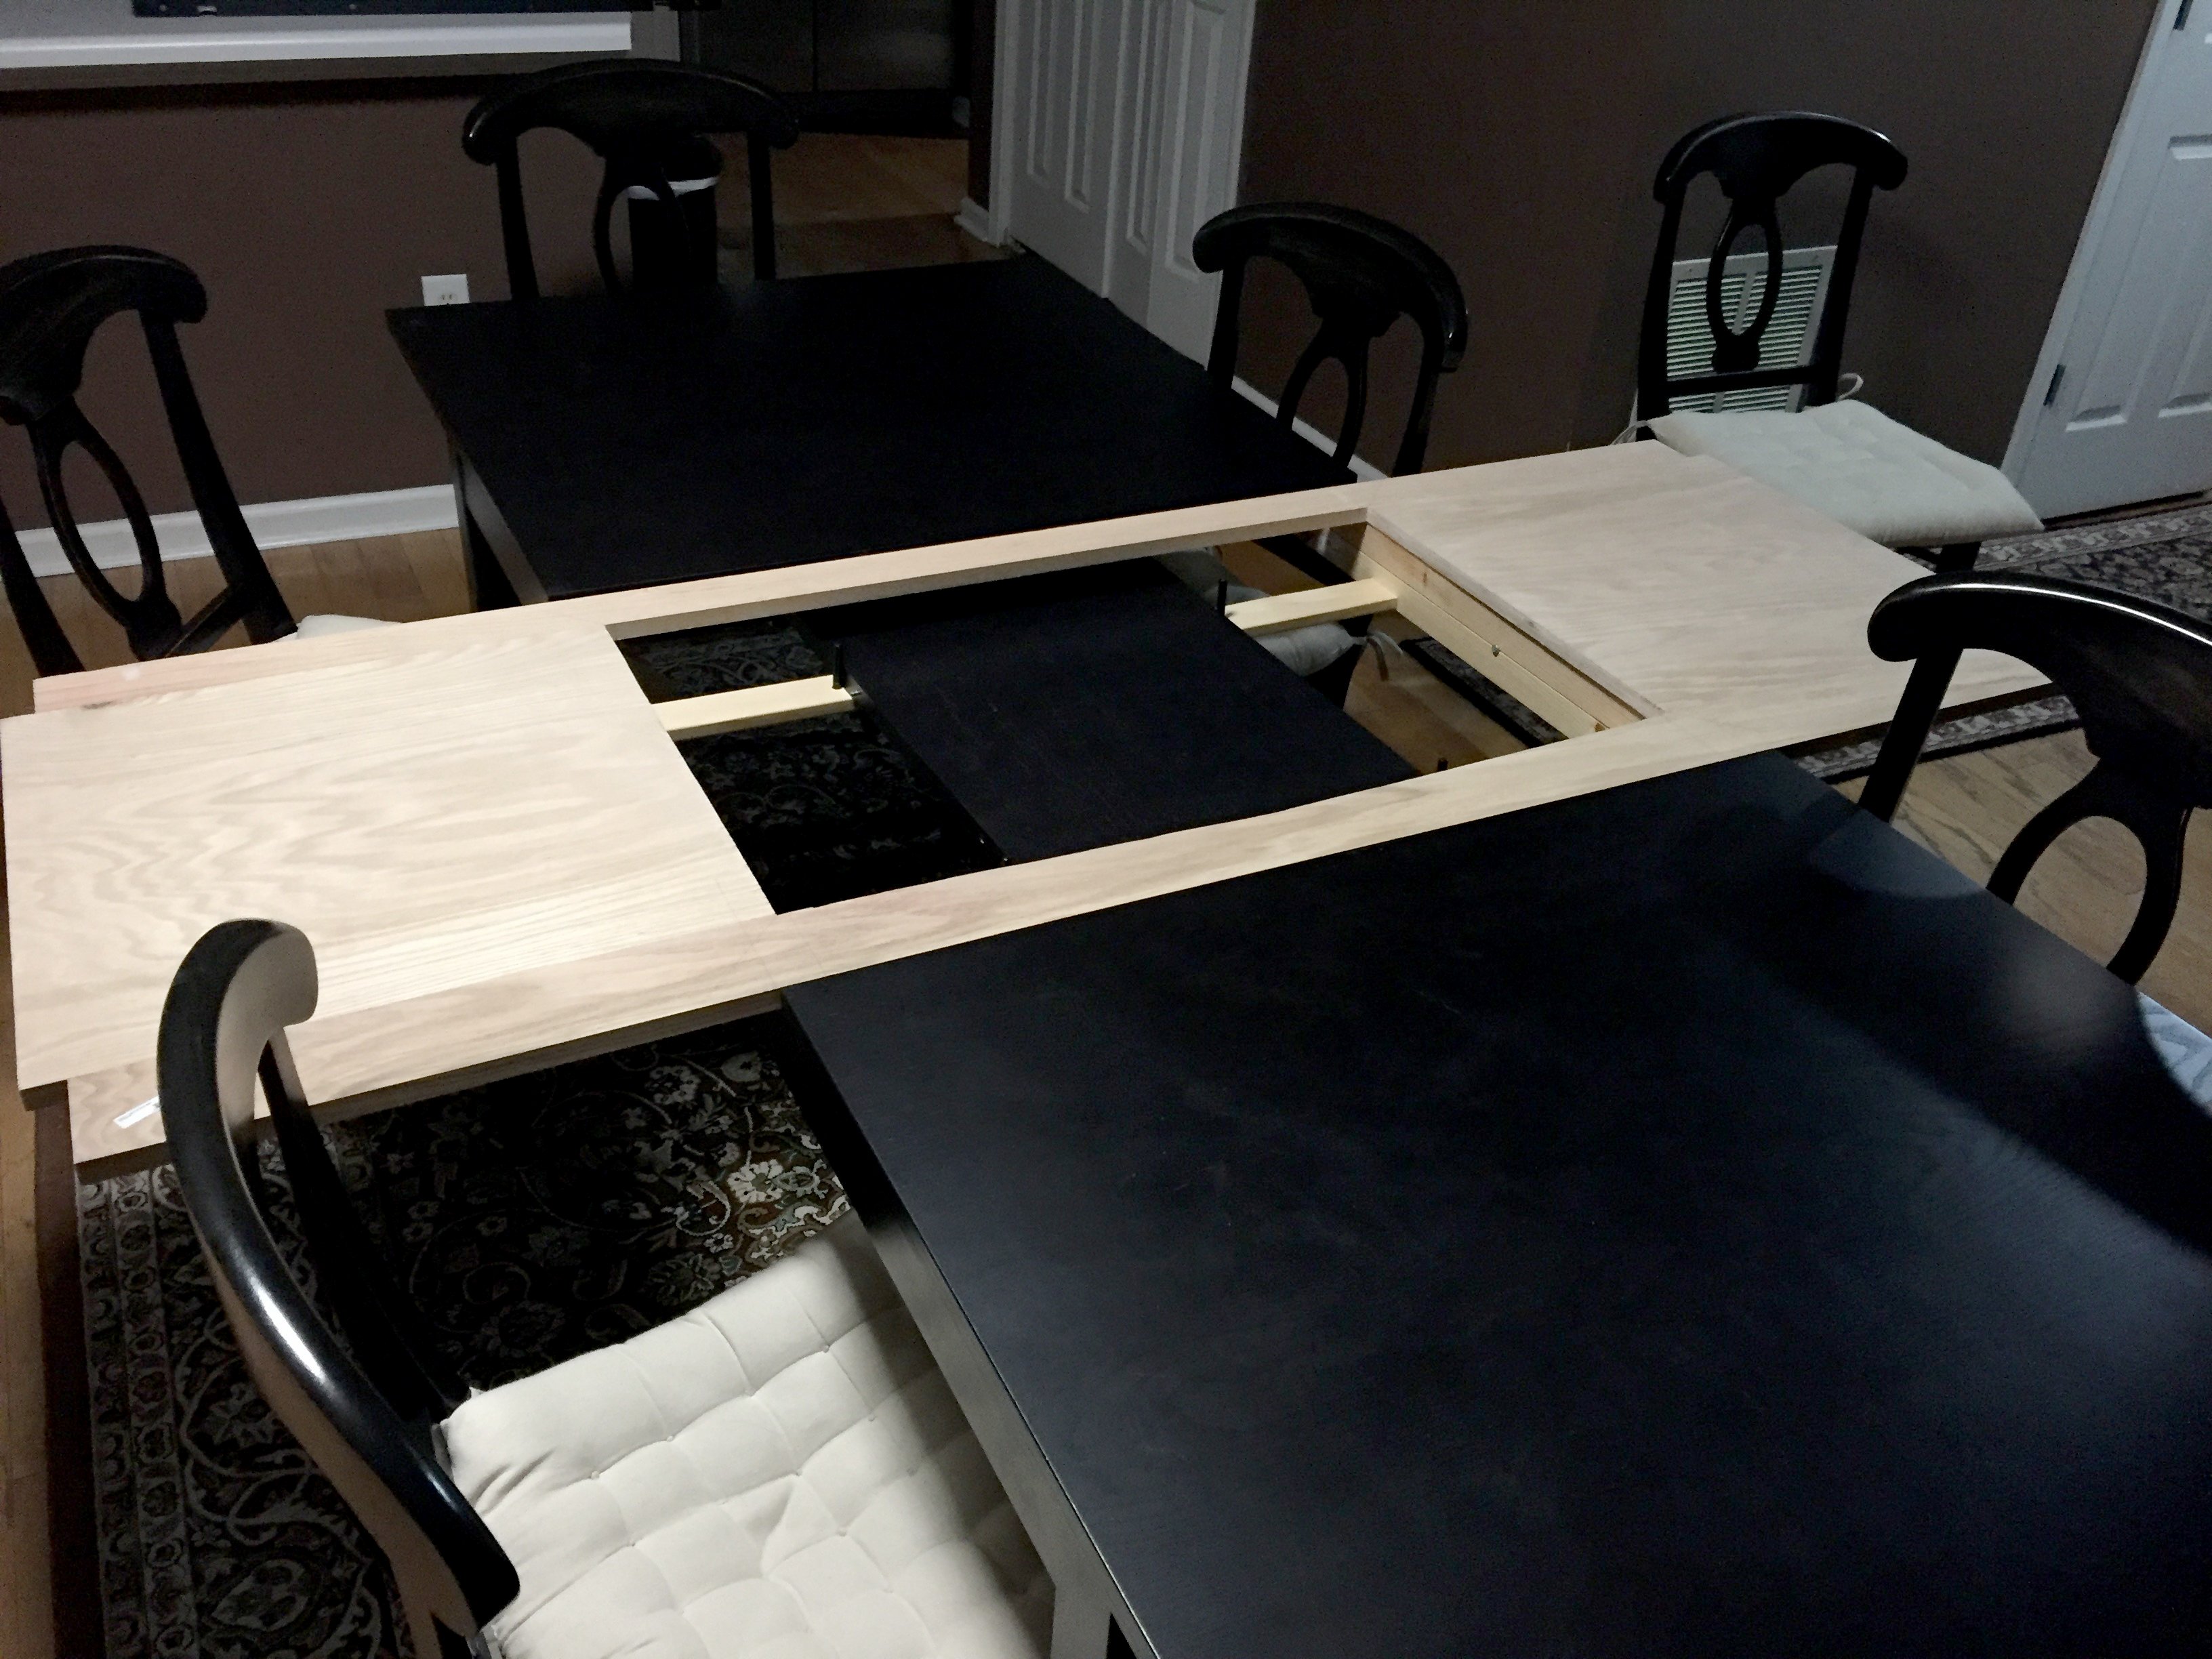 "The ends and the rails are now glued and screwed together. I wanted to check on where the screen would fall in the table, double check the heights and to determine where I was going the start the curves for the ends."